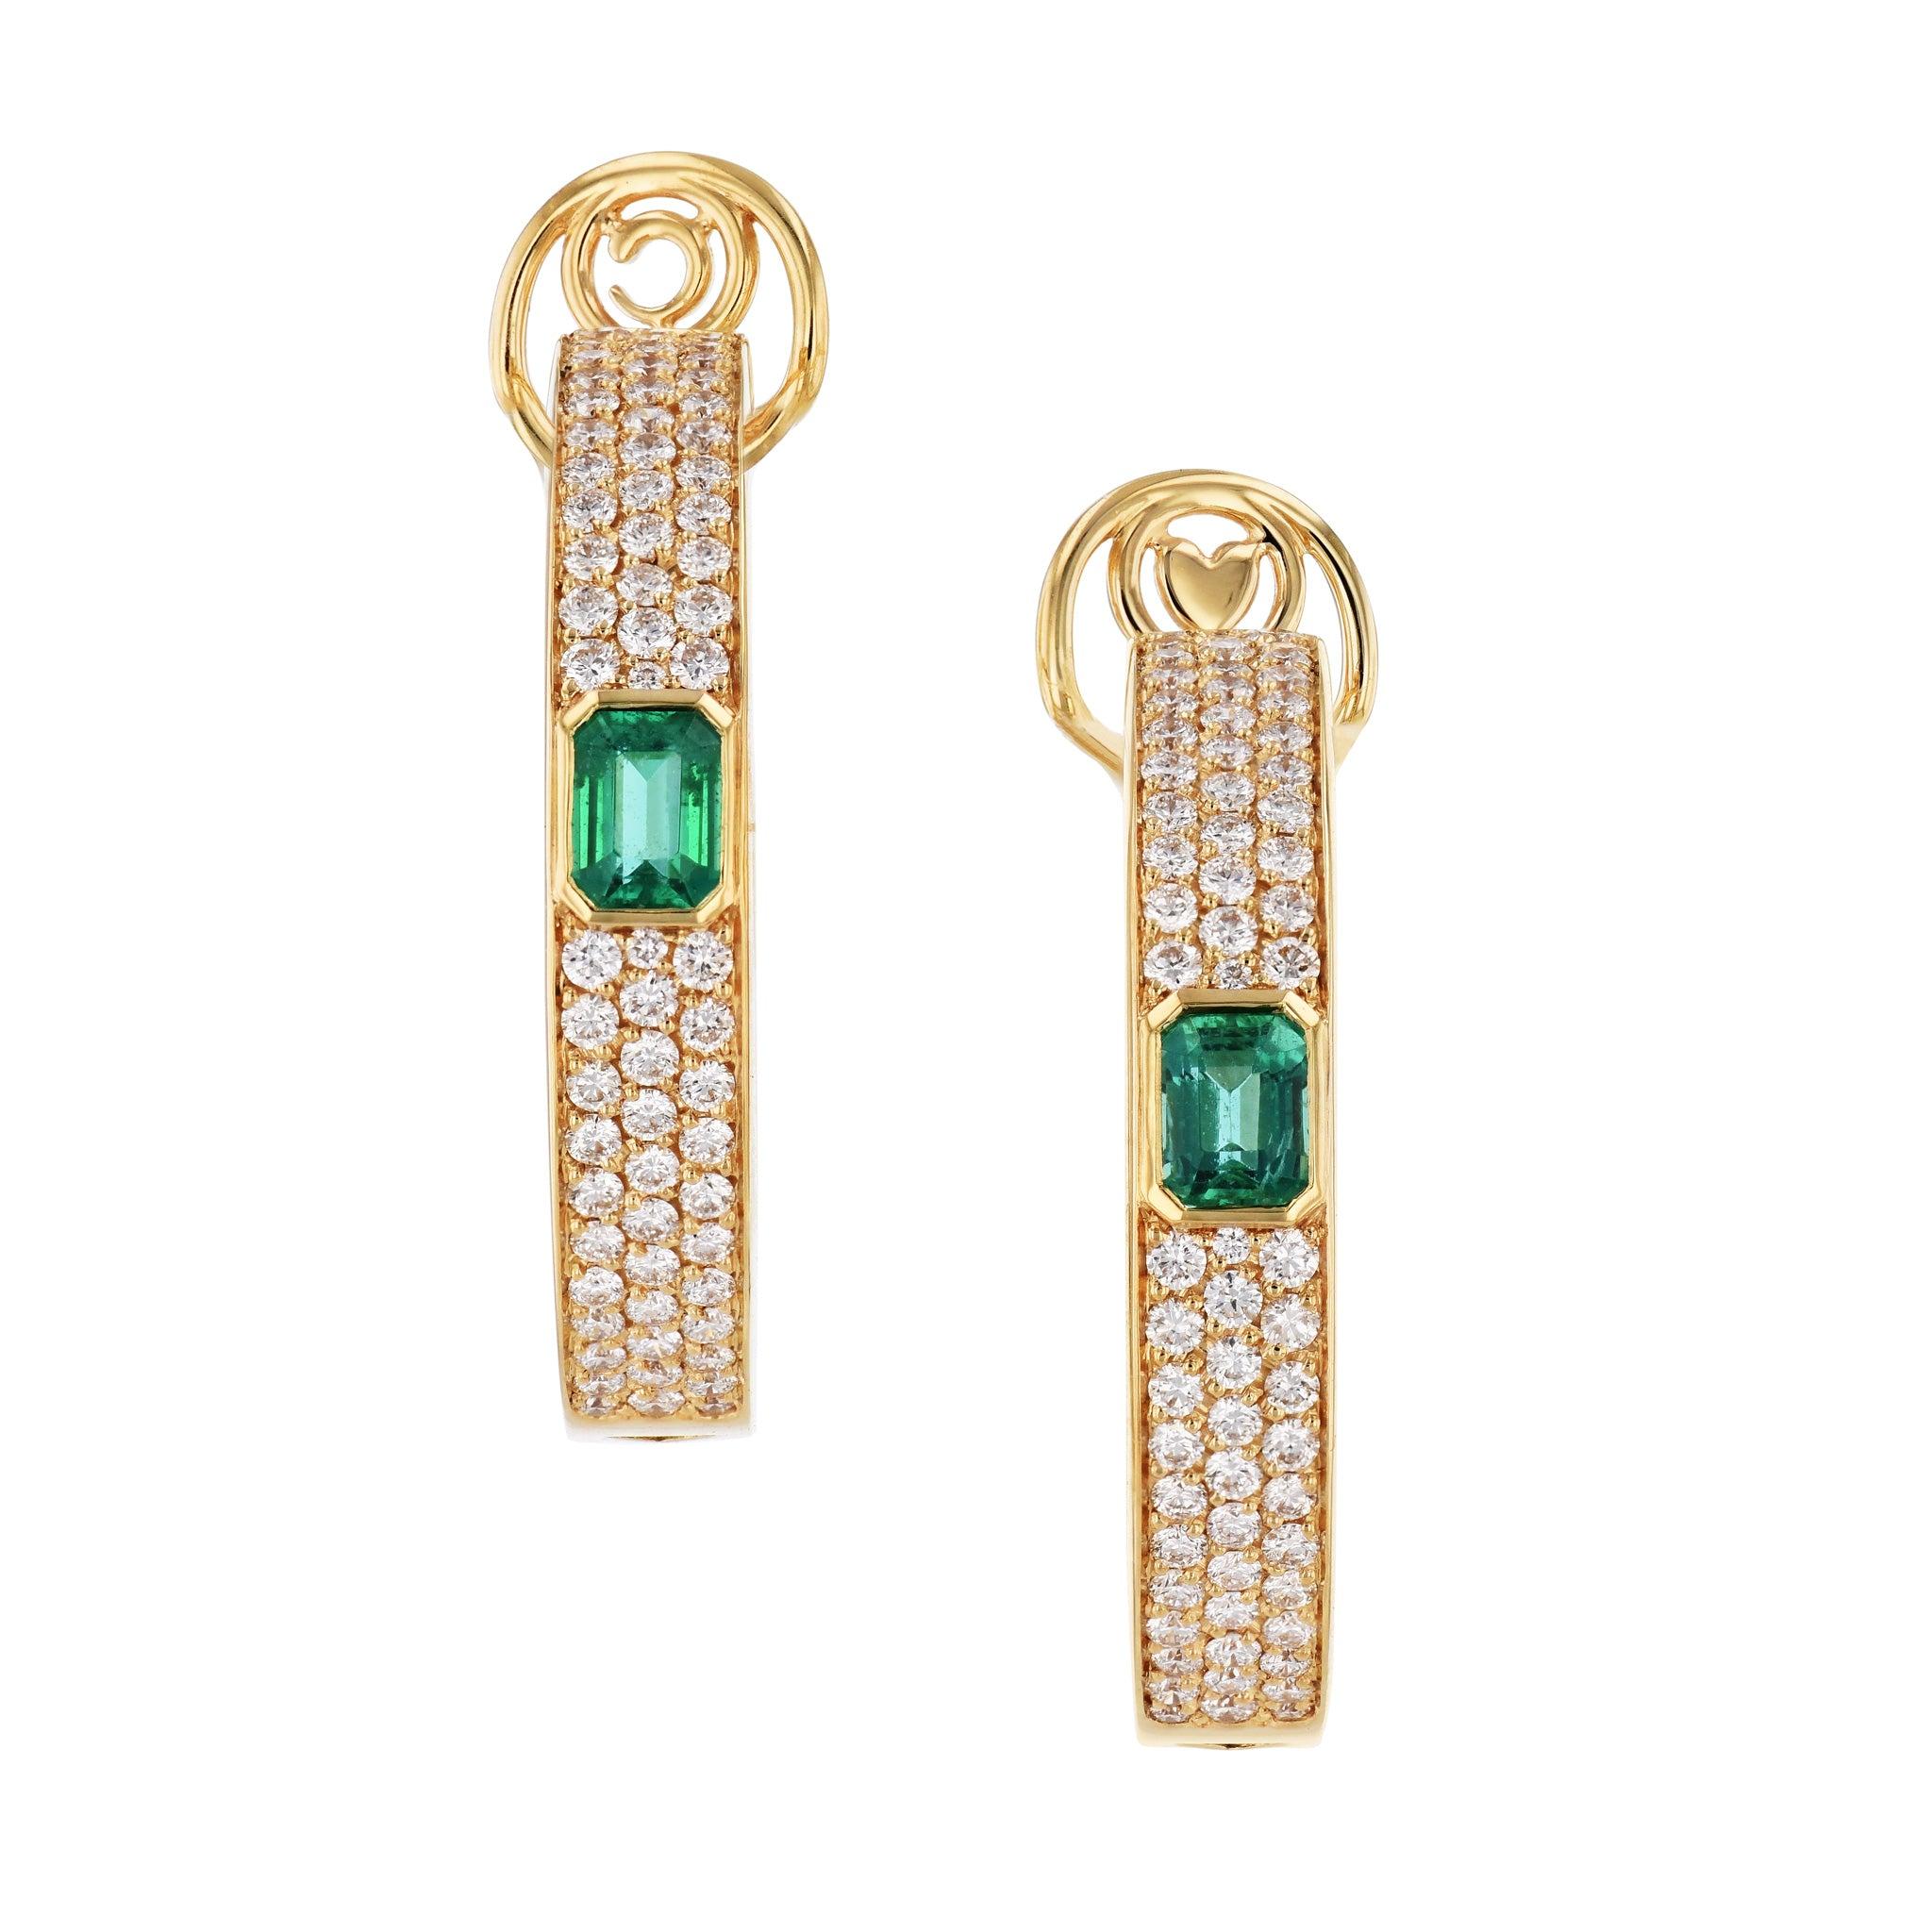 Awe-inspiring 18kt yellow gold hoop earrings, adorned with emeralds and diamonds.  
These earrings will take your breath away!
Emerald and Diamond Yellow Gold Hoop Earrings.

18kt. Yellow Gold. 
Hoop Earrings.
Emeralds: 1.89ct  total weight.